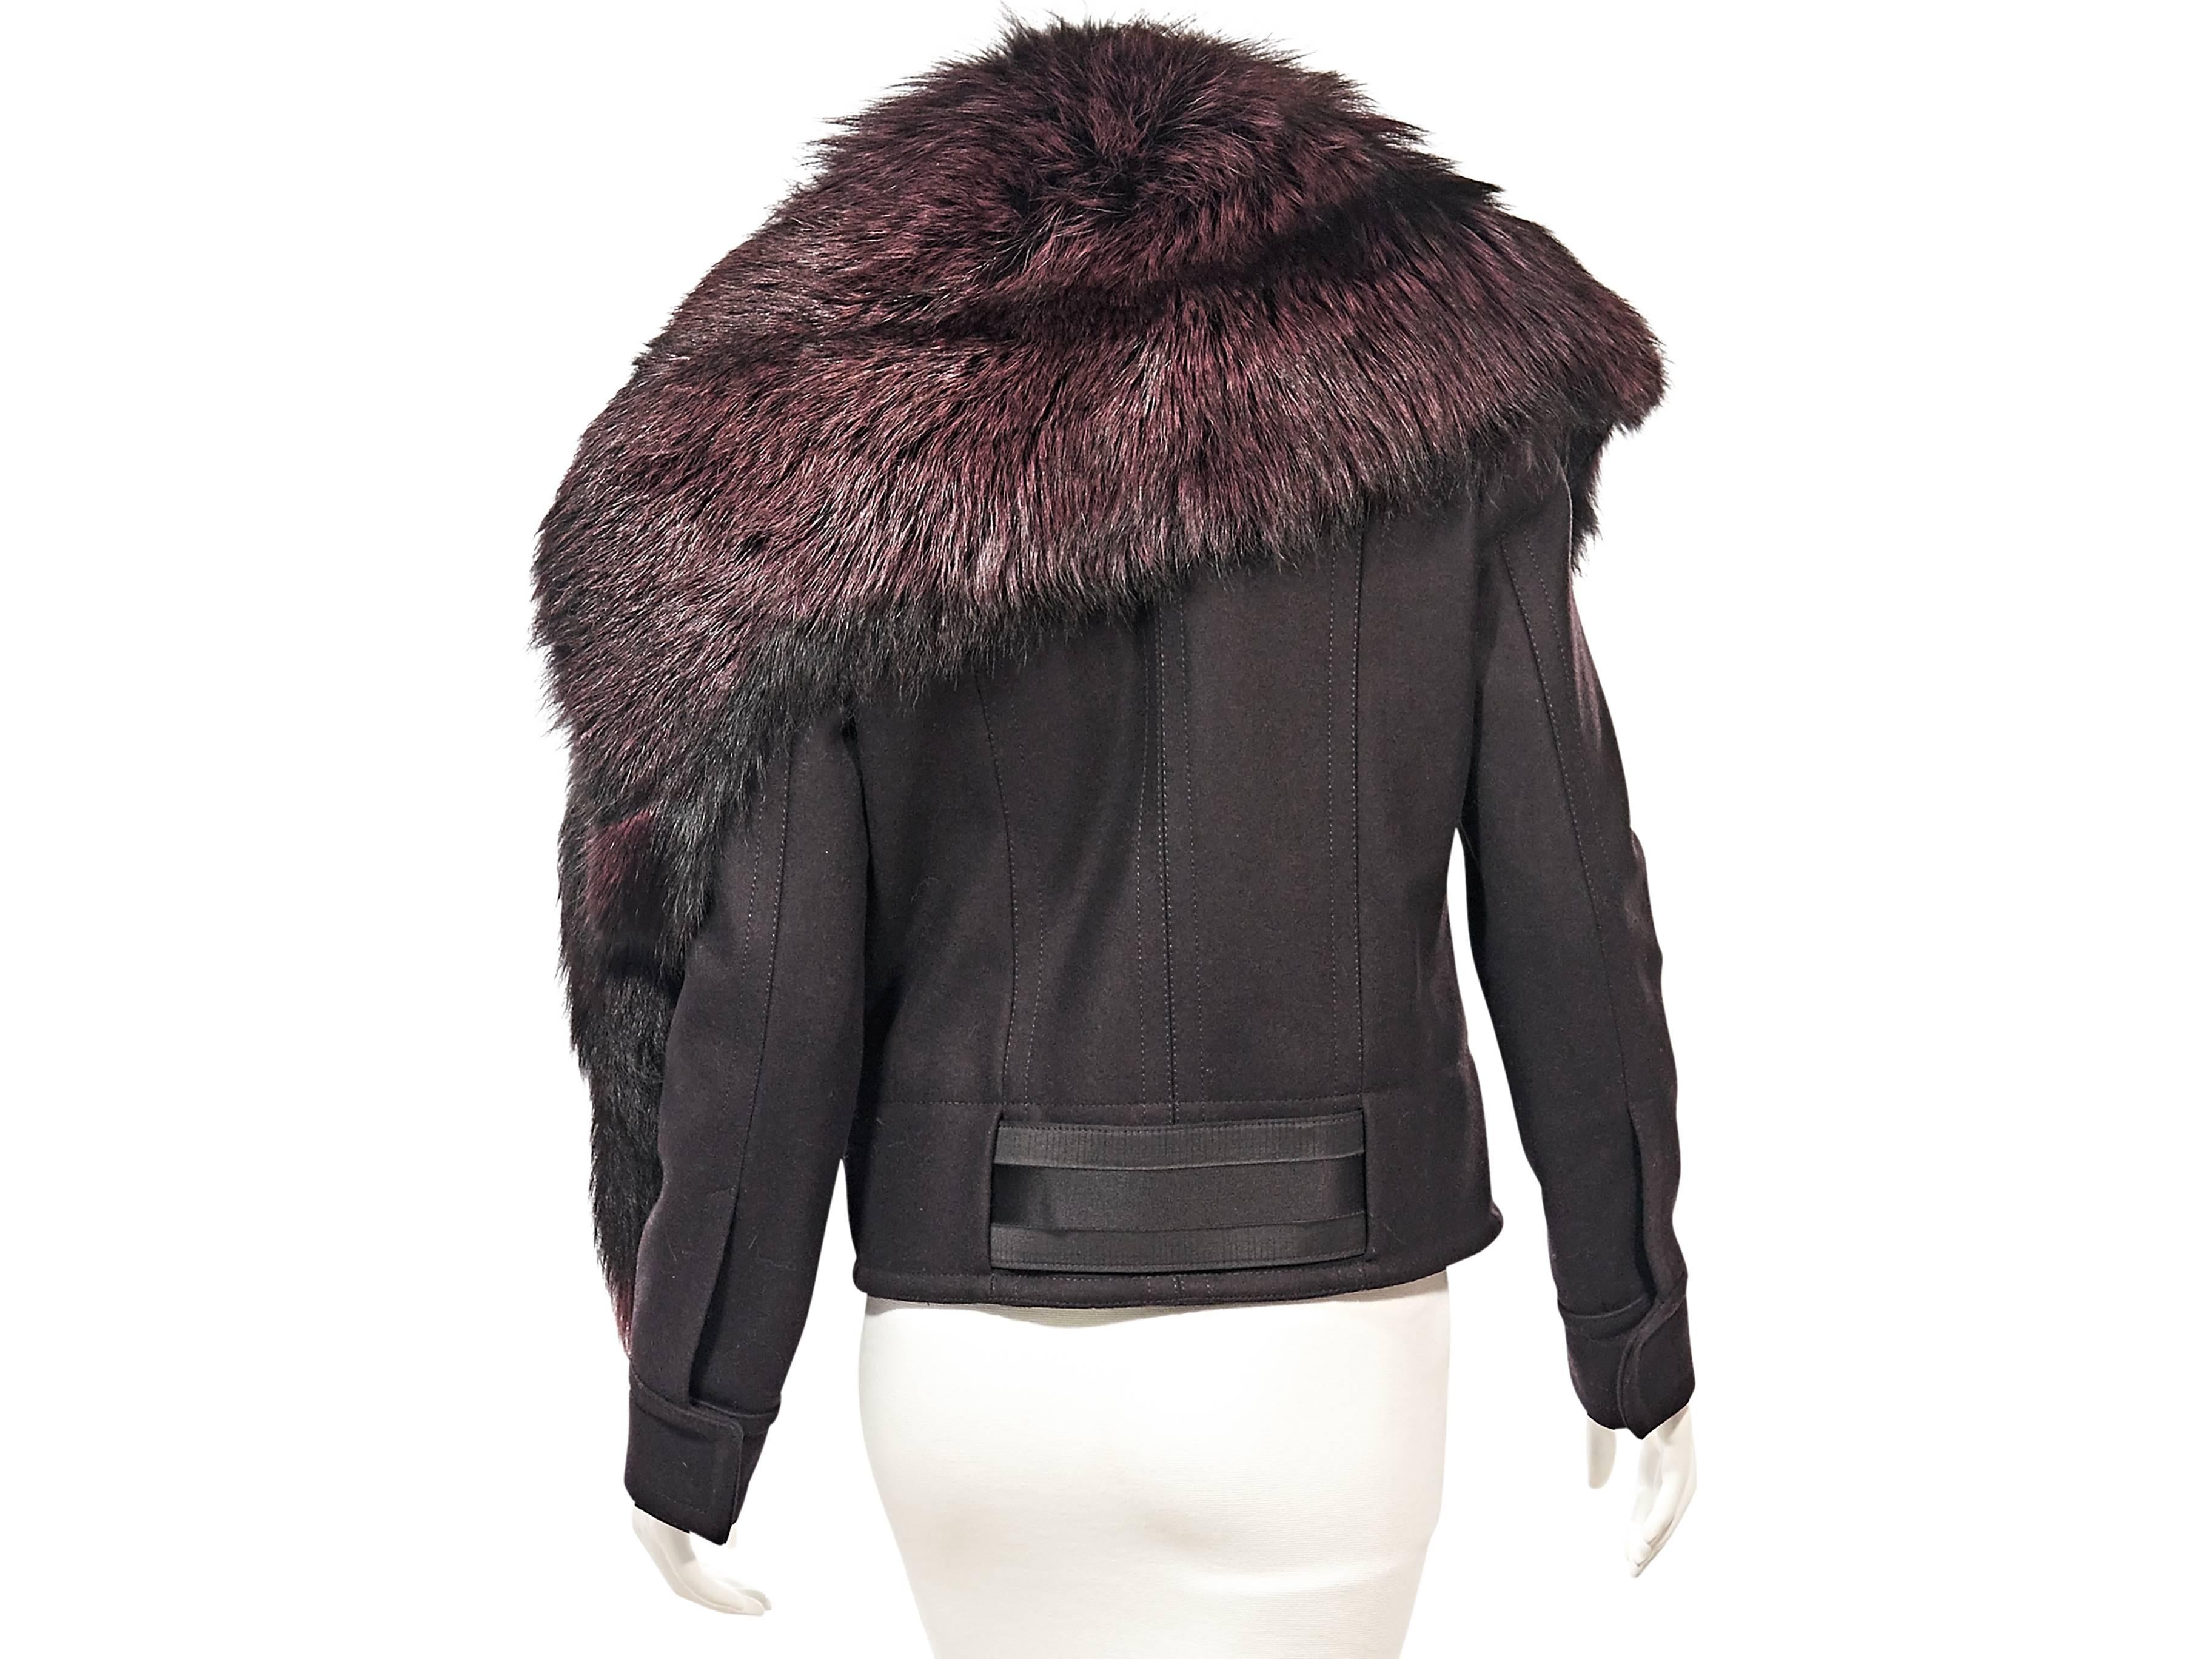 Product details:  ﻿Dark purple jacket with detachable fox fur trim by Gucci.  From the Tom Ford era.  Shawl collar.  Long sleeves.  Concealed front closure.  Front slide pockets.  
Condition: Excellent. 
Retails: $13,485